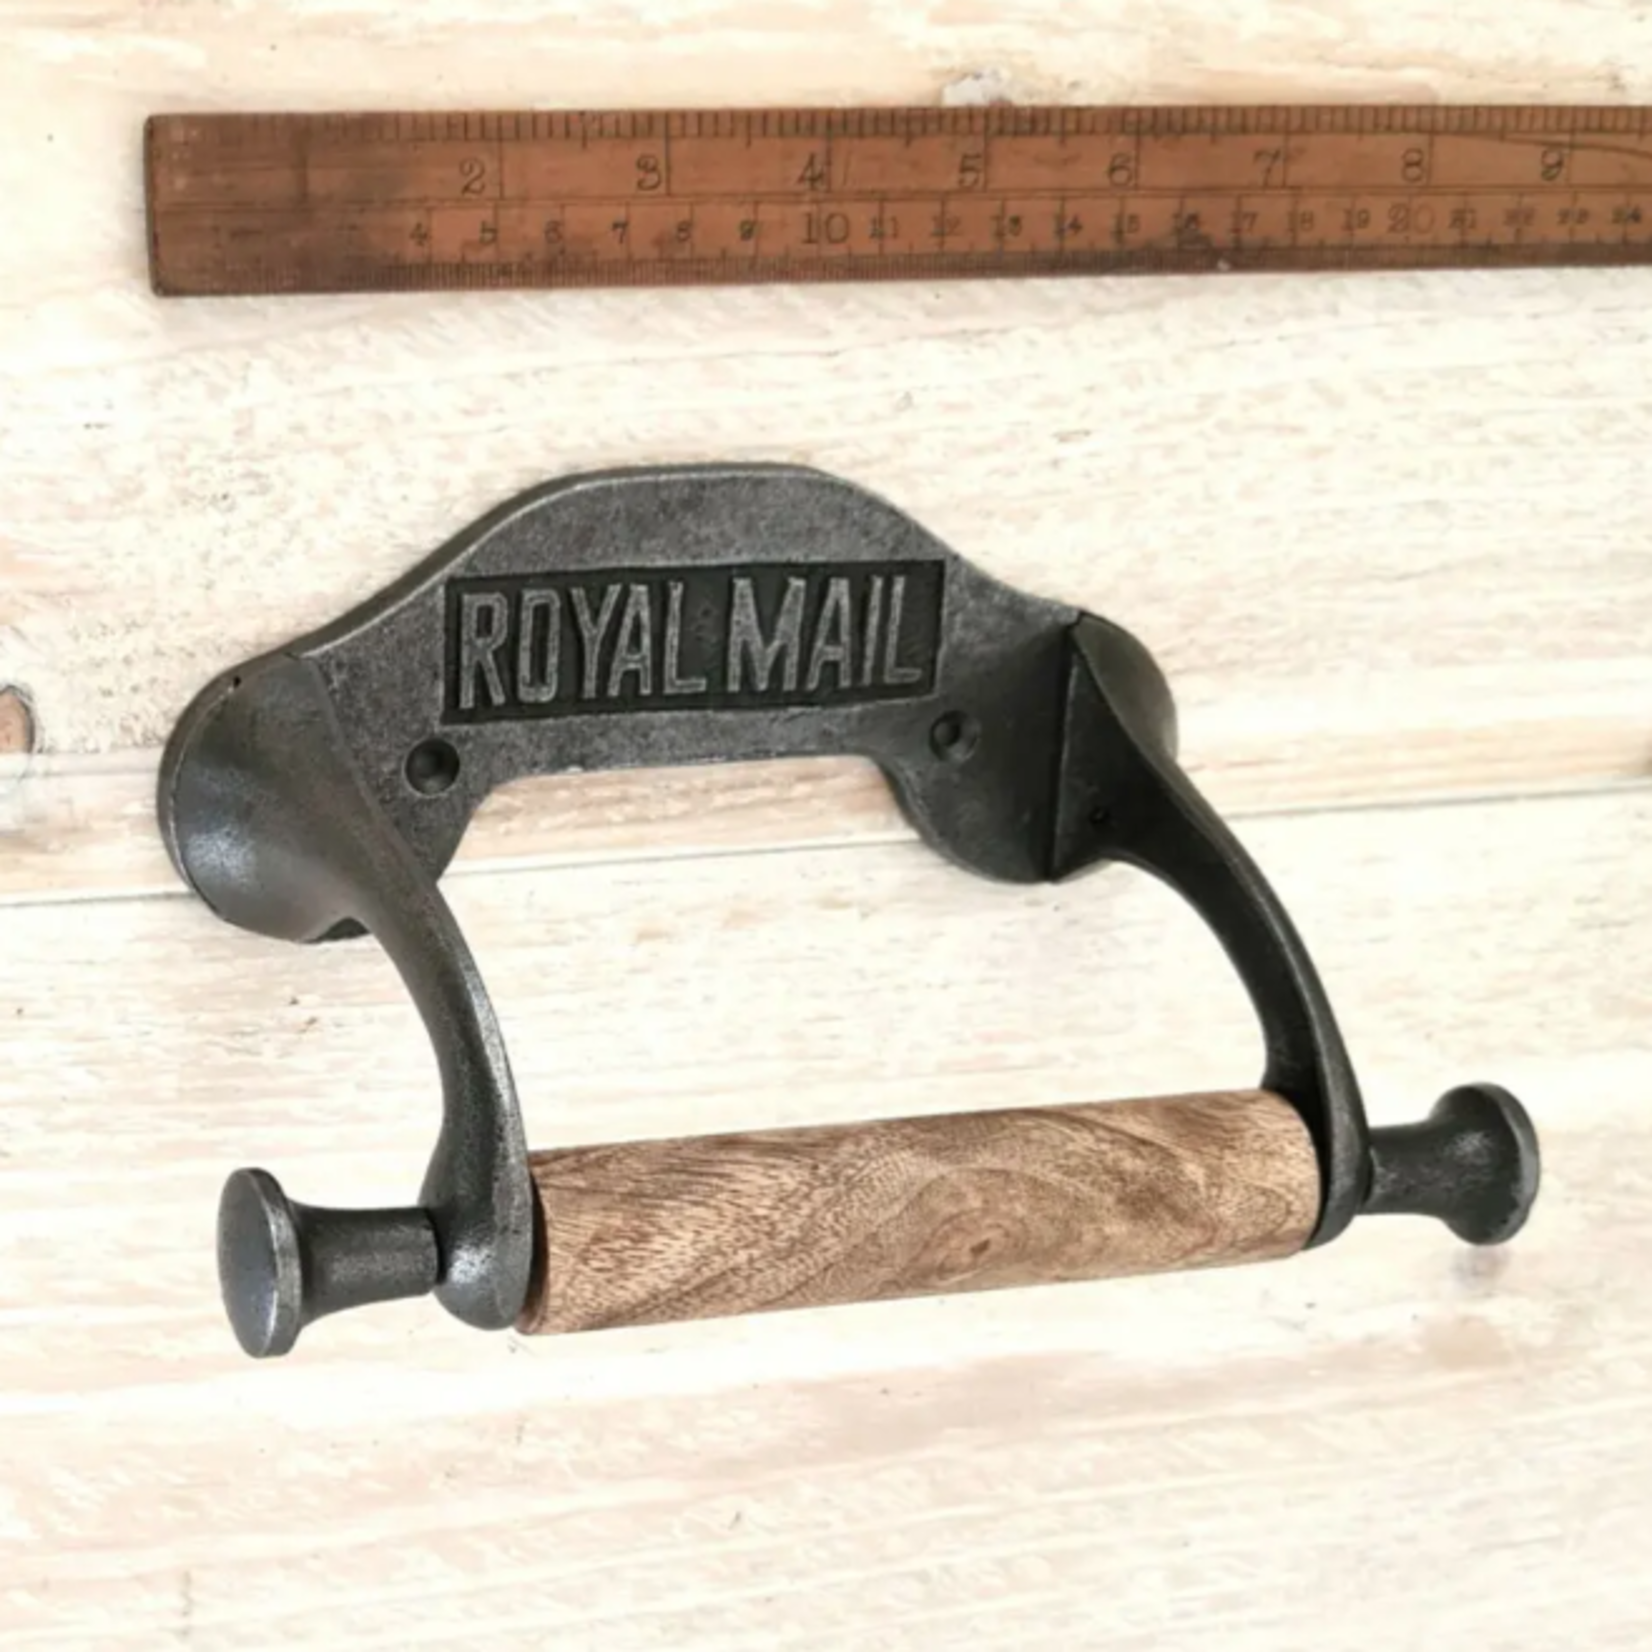 IRON RANGE Toilet Roll Holder ROYAL MAIL Long Arm Cast Ant Iron 150mm